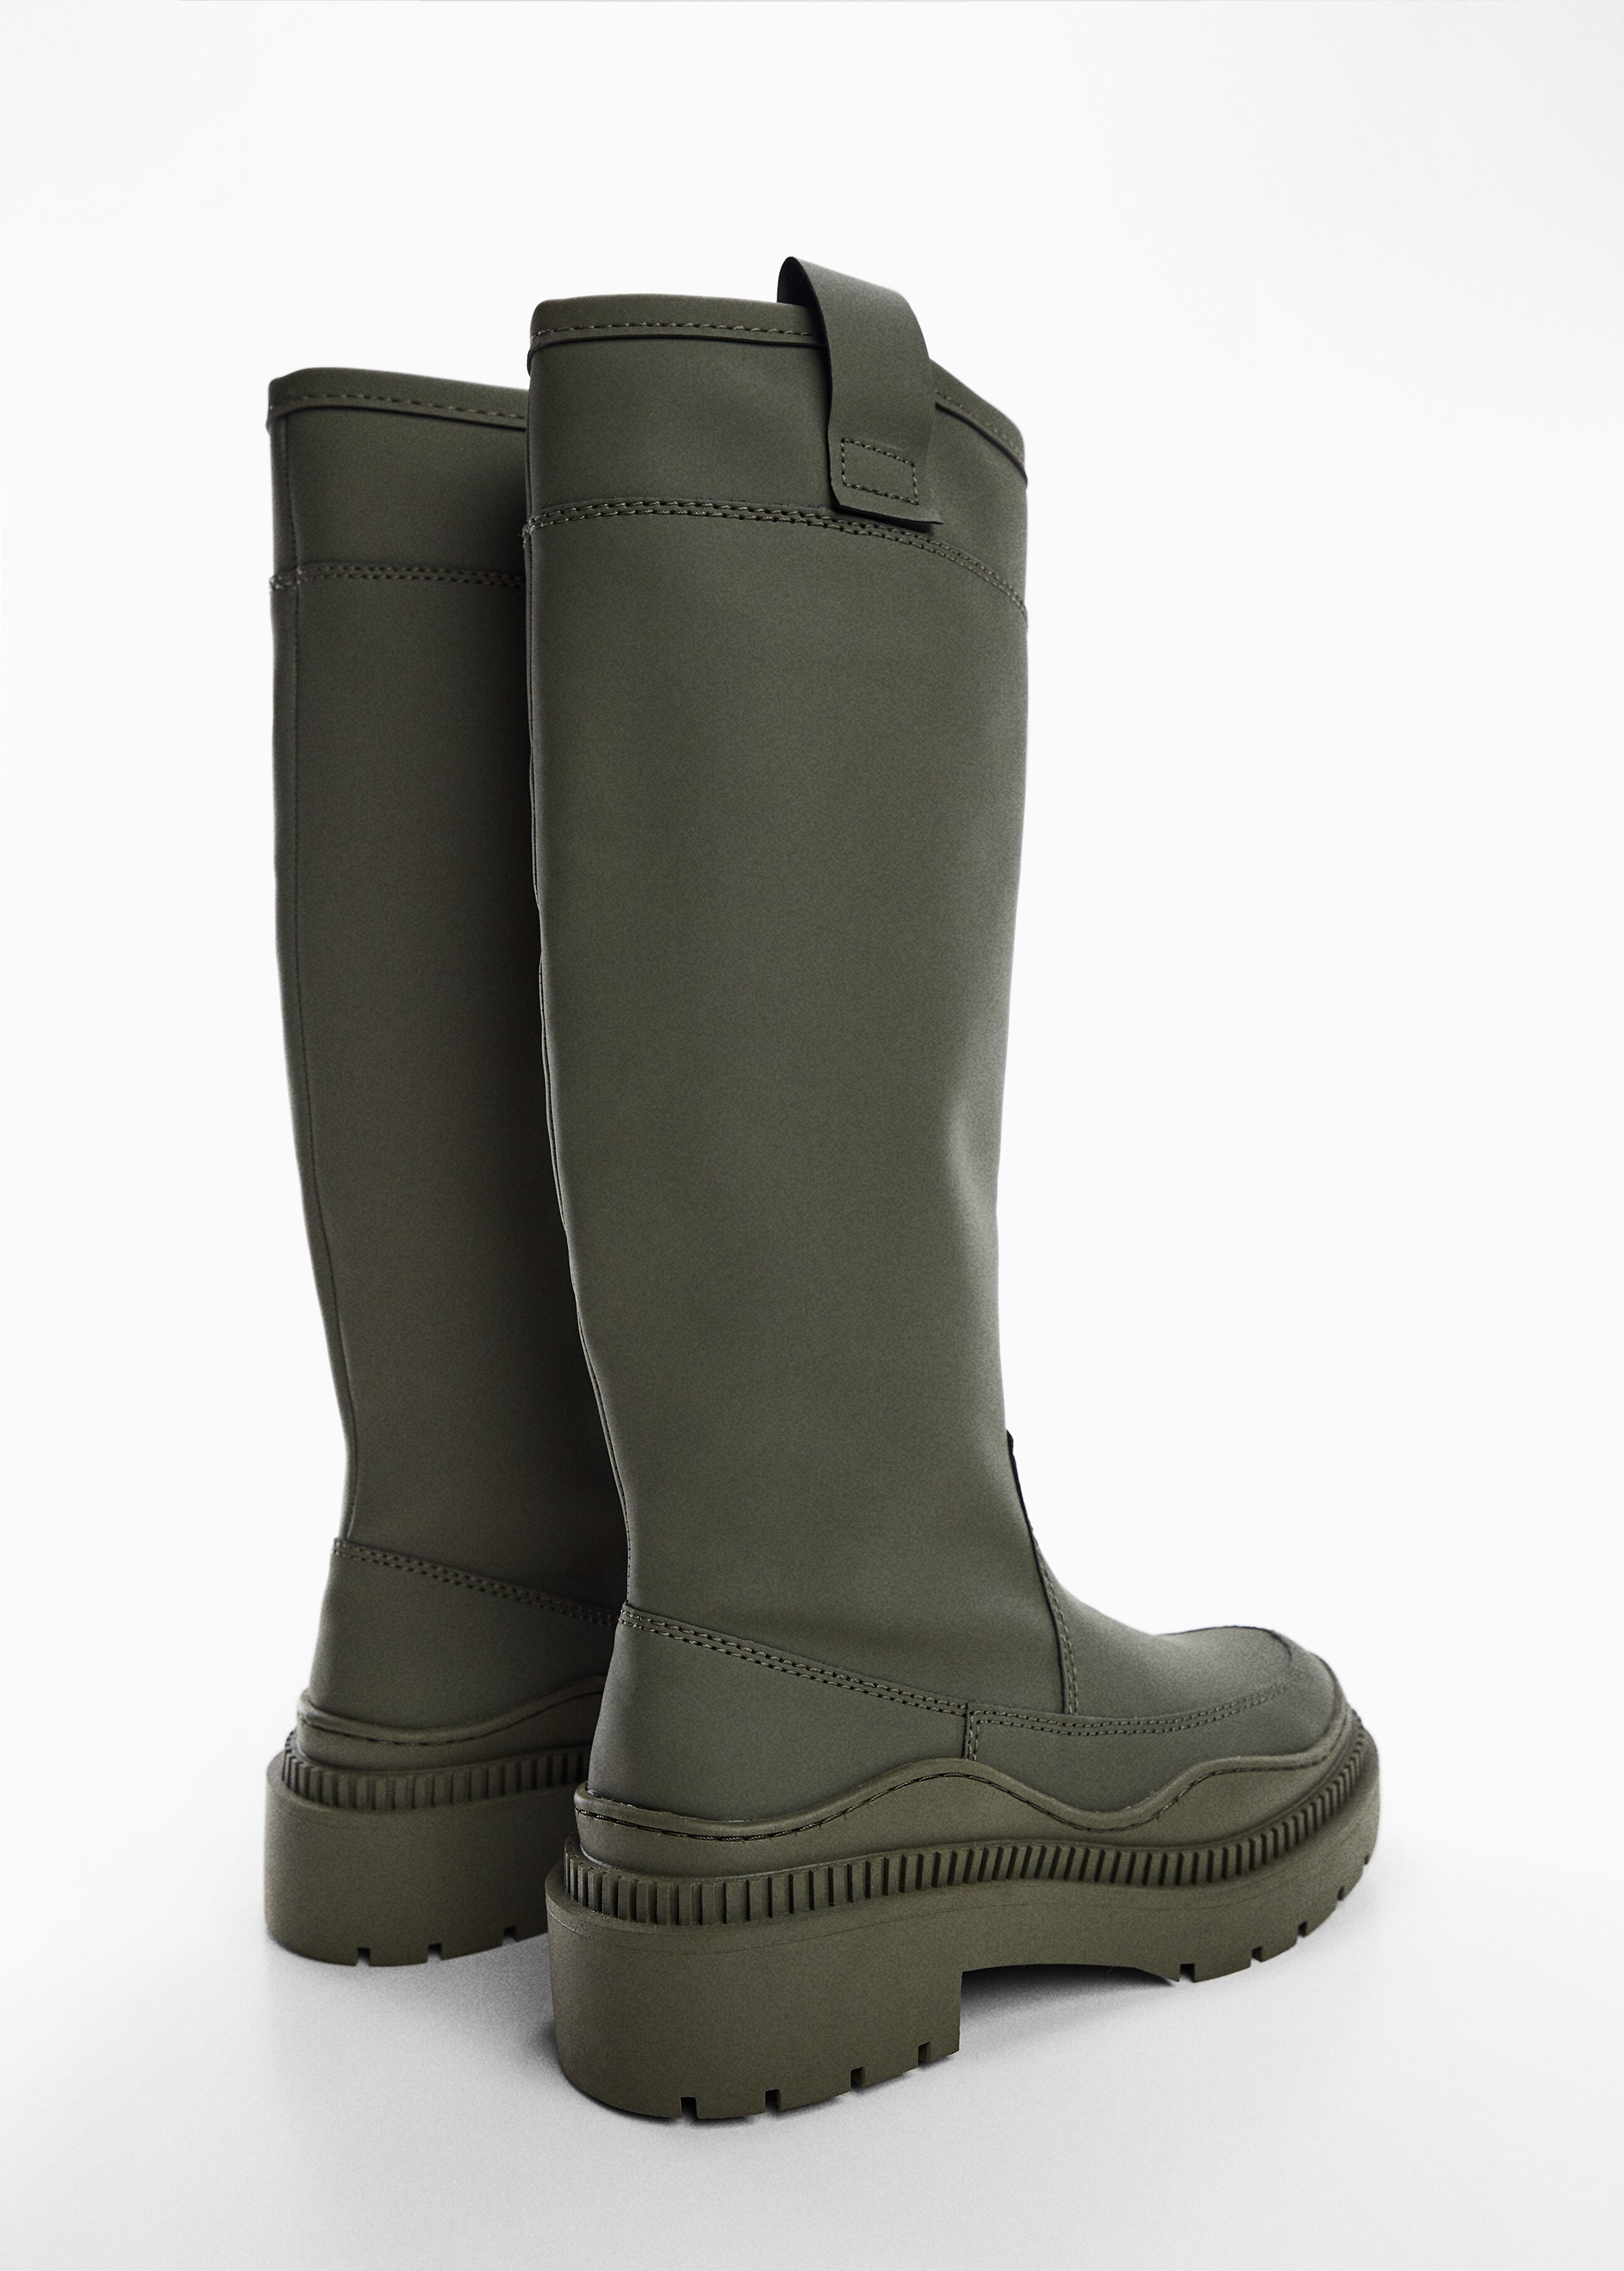 Platform boots with tall leg - Details of the article 2